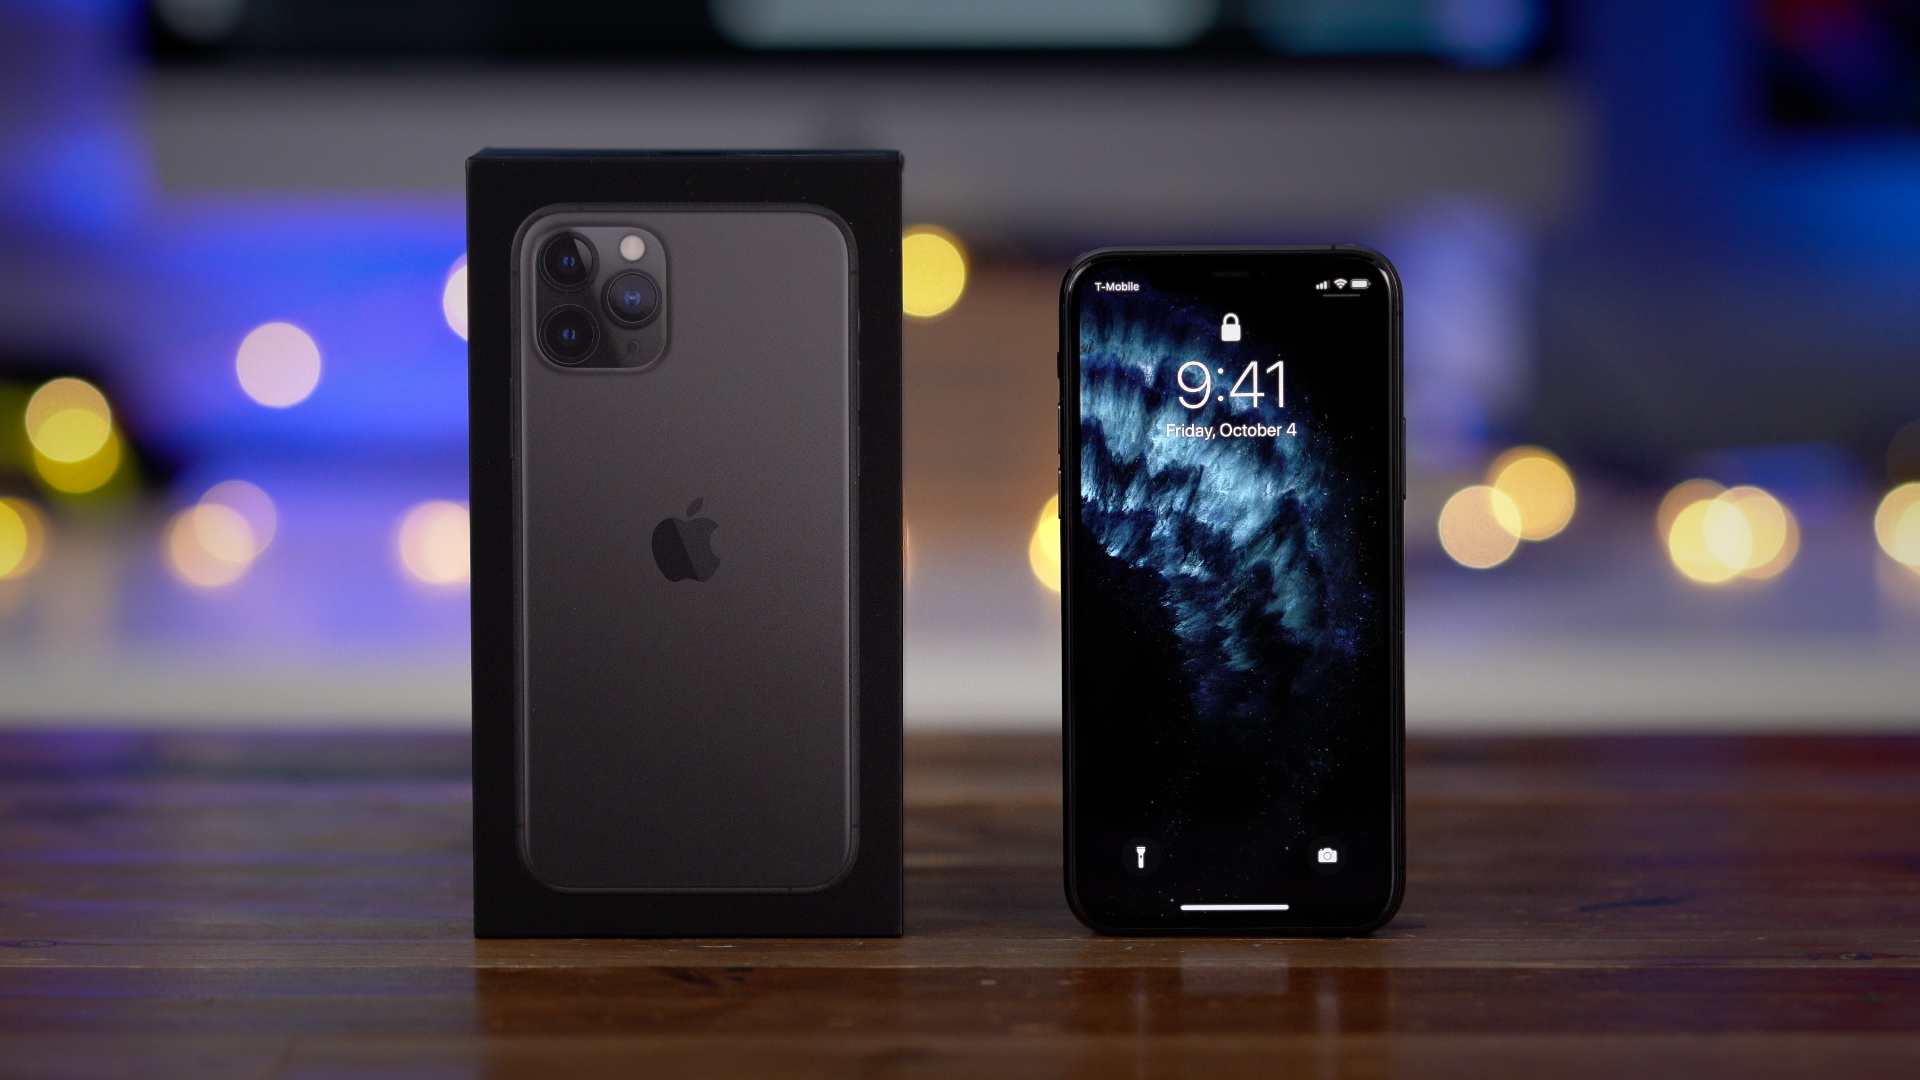 Top iPhone 11 Pro features: built for photo and video enthusiasts